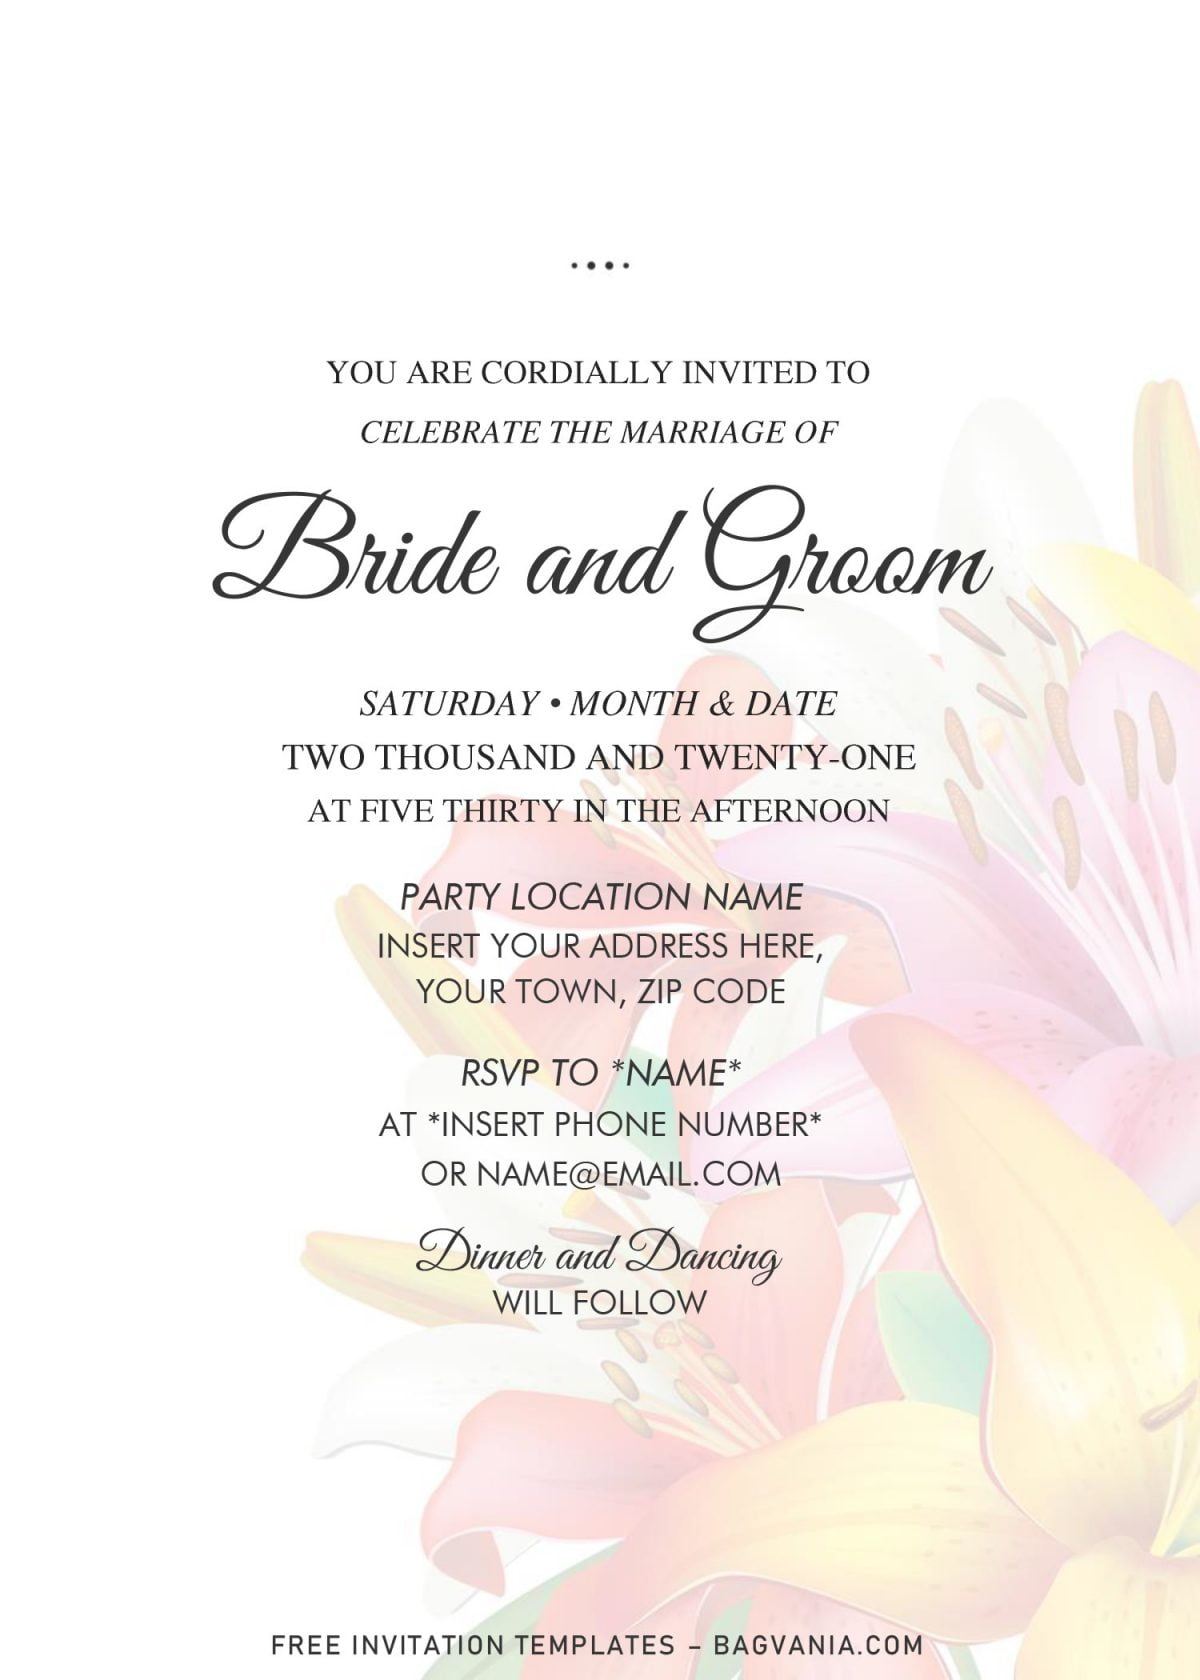 Free Vintage Floral Bouquet Baby Shower Invitation Templates For Word and has watercolor floral background